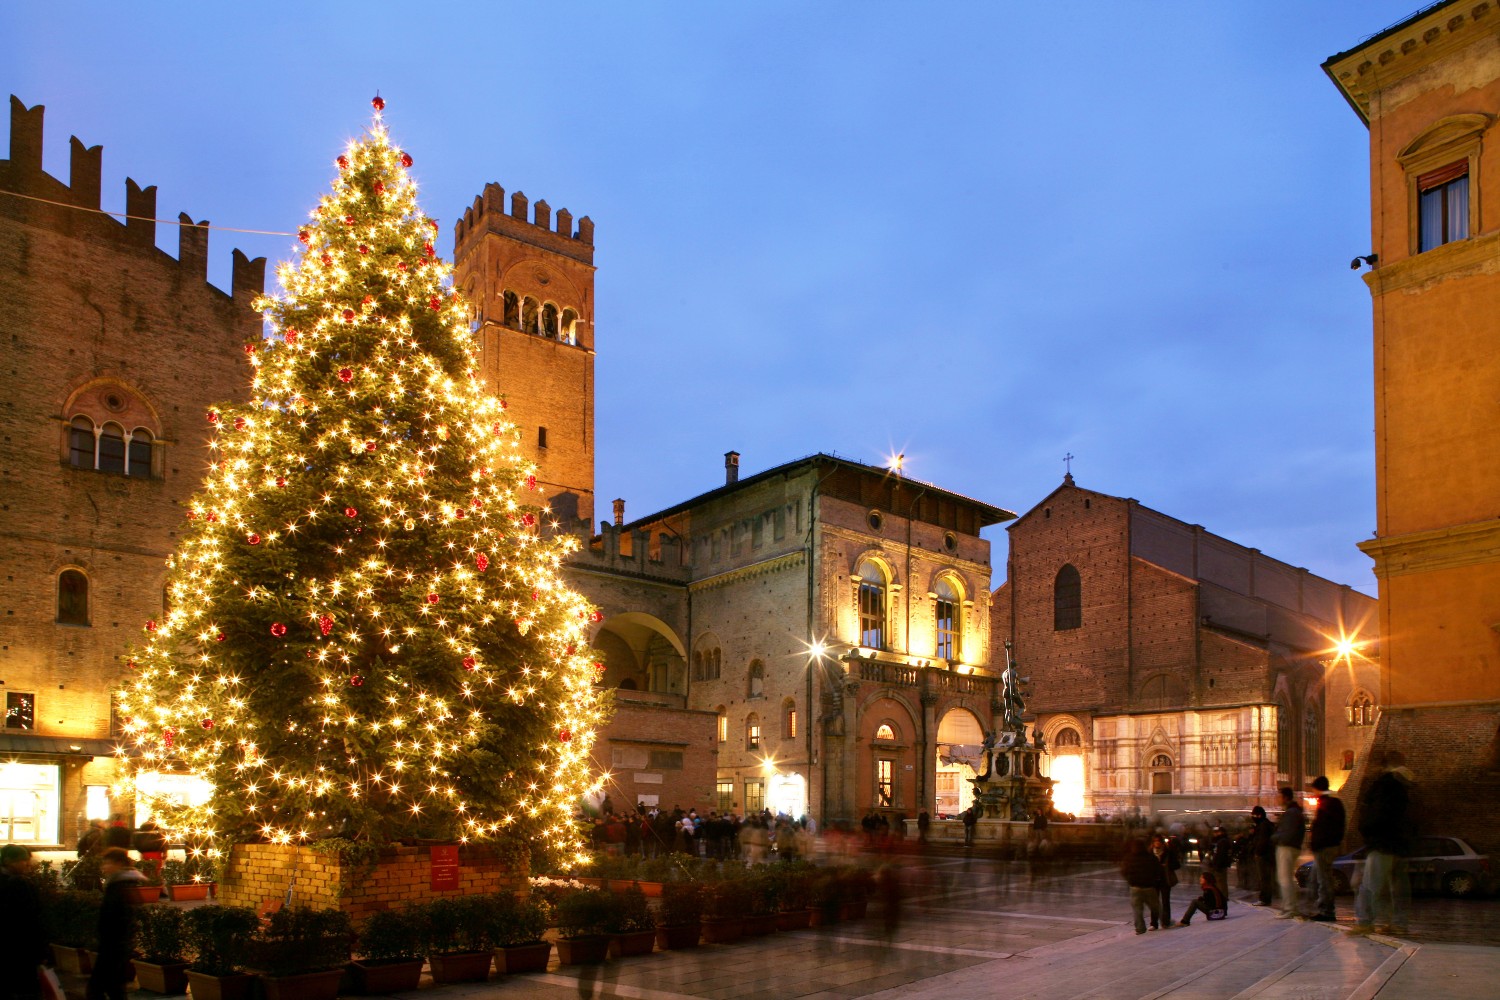 History and magic of the Christmas Trees #inEmiliaRomagna